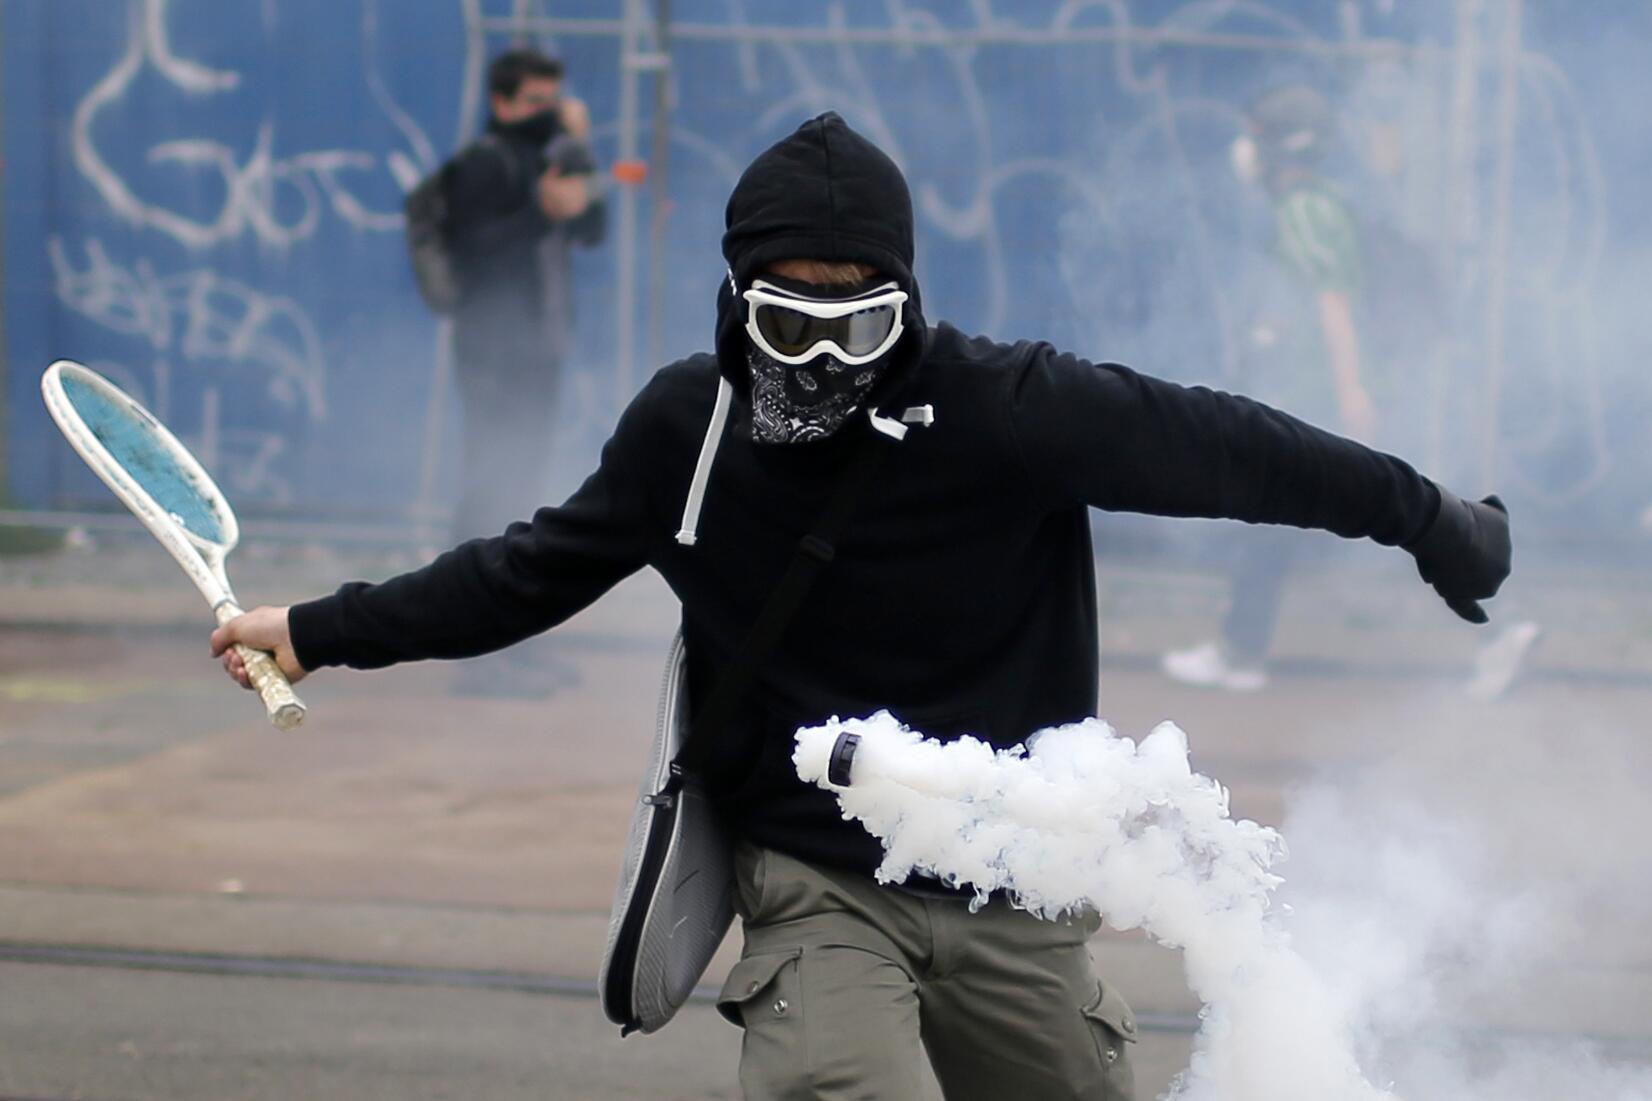 Protestor with tennis racket 